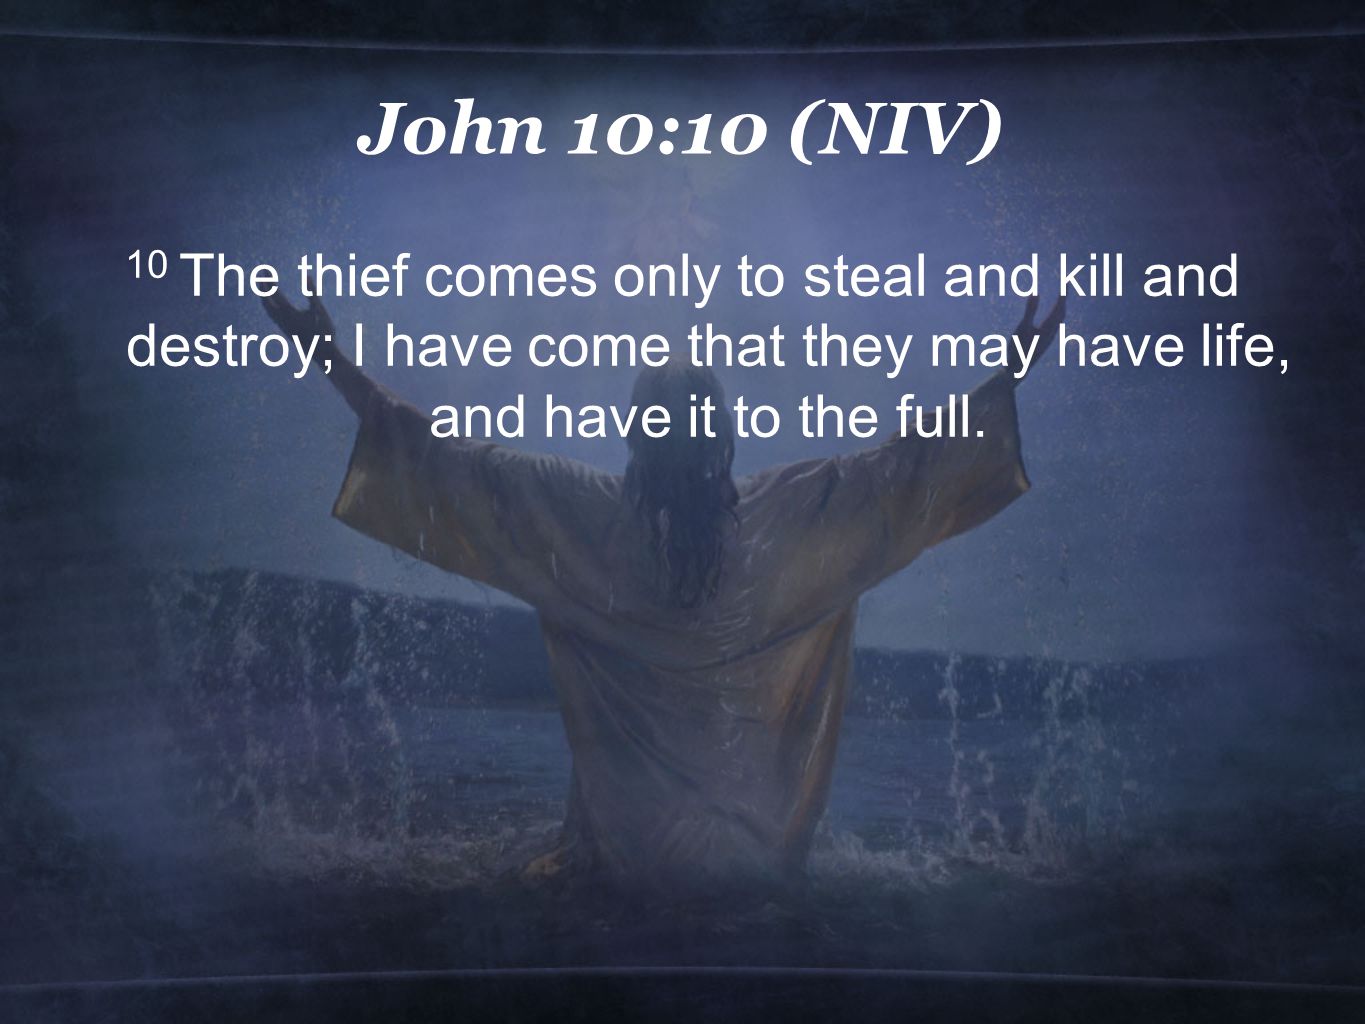 John 10:10 (NIV) 10 The thief comes only to steal and kill and destroy; I have come that they may have life, and have it to the full.